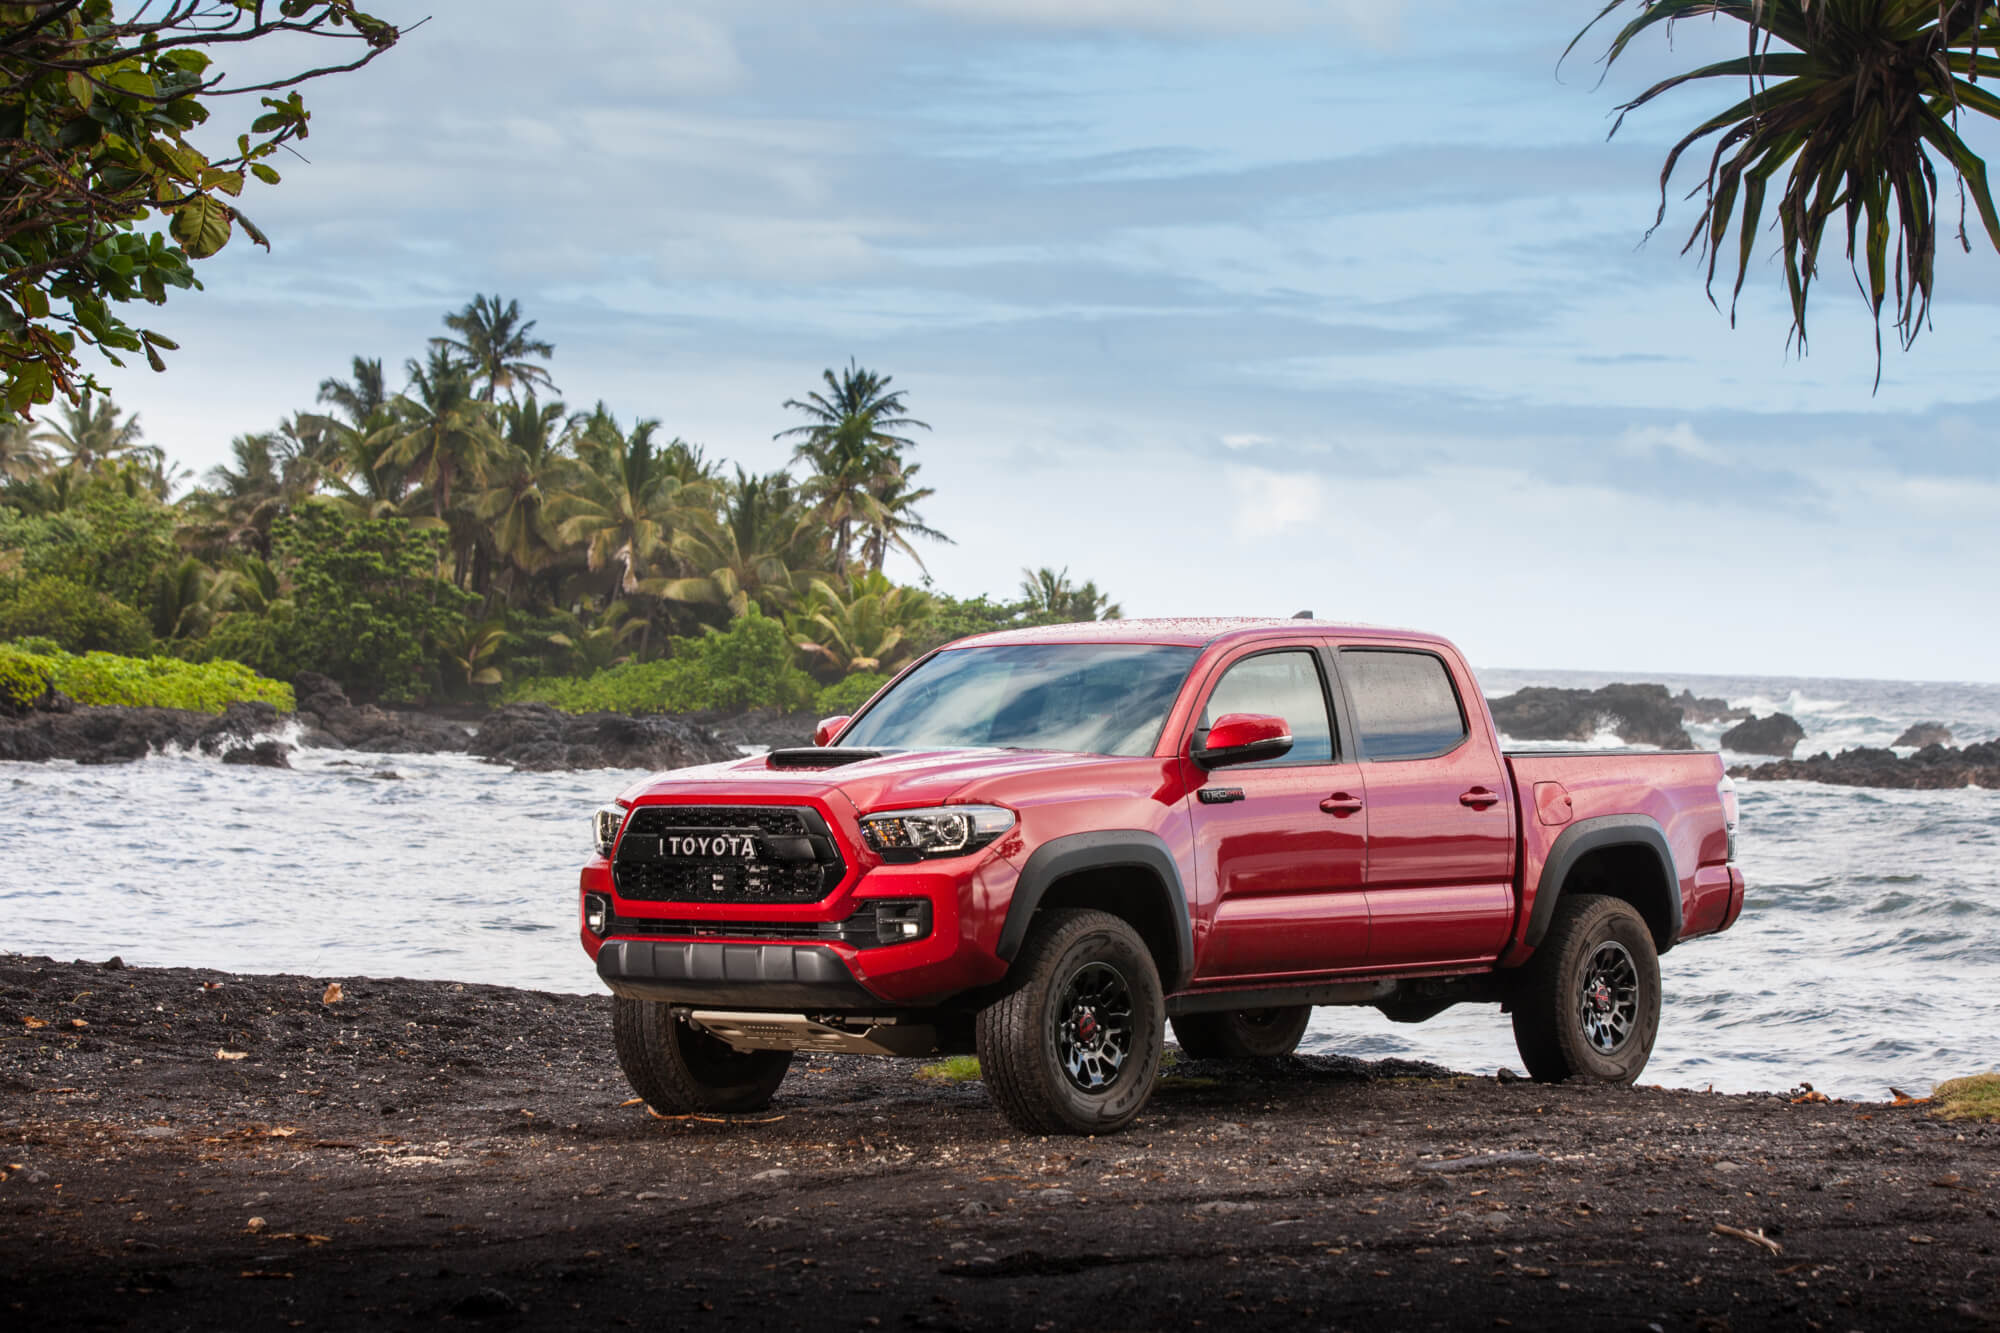 Toyota Tacoma TRD Pro Vehicle Test: Best Tacoma TRD Review